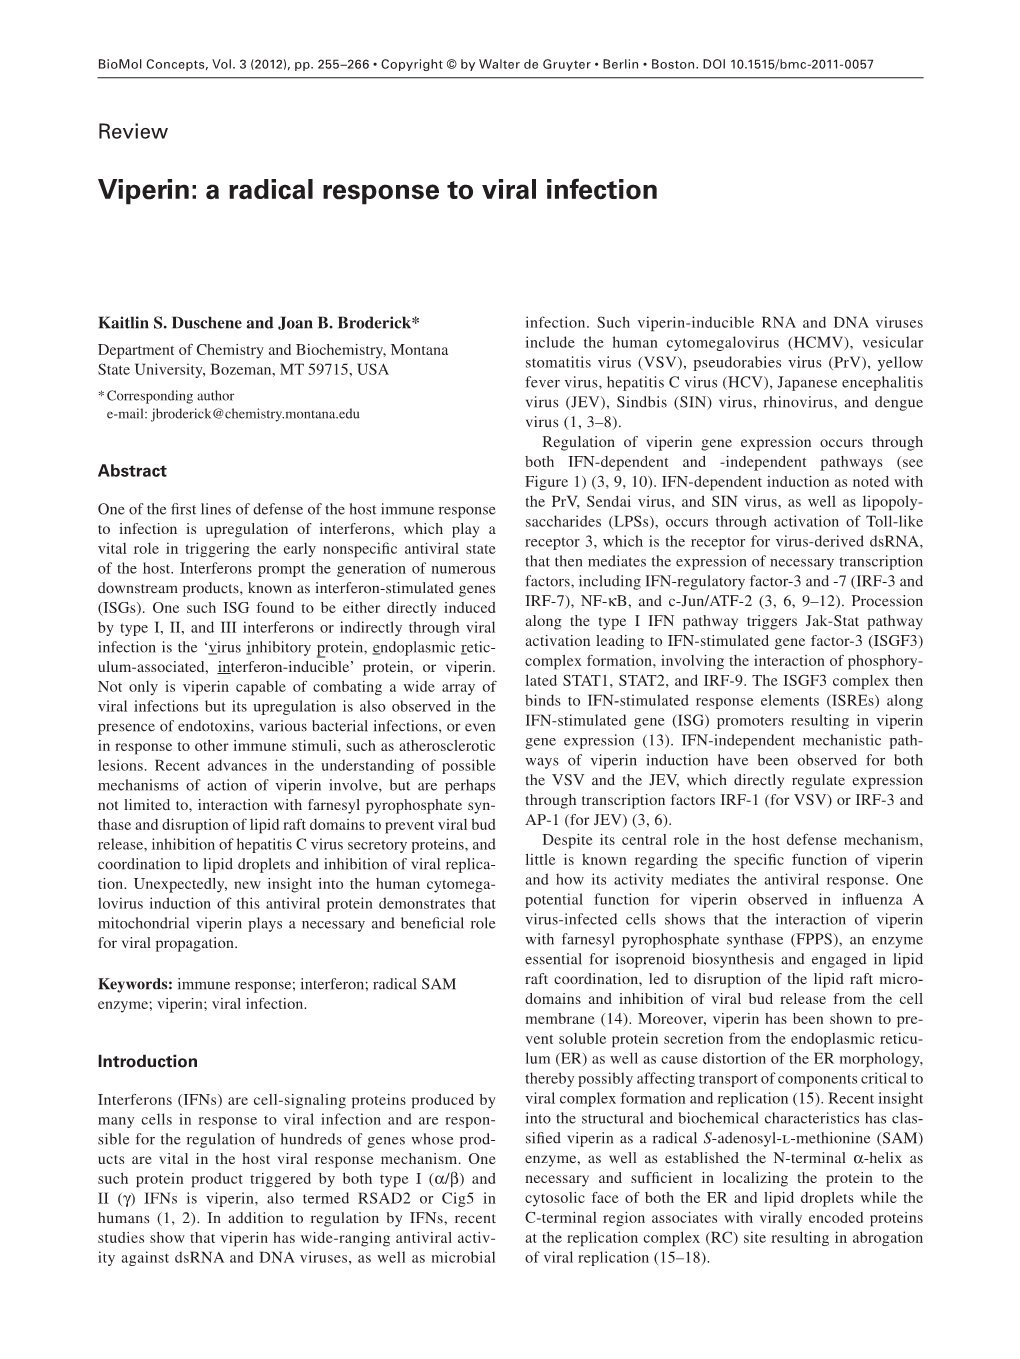 Viperin: a Radical Response to Viral Infection